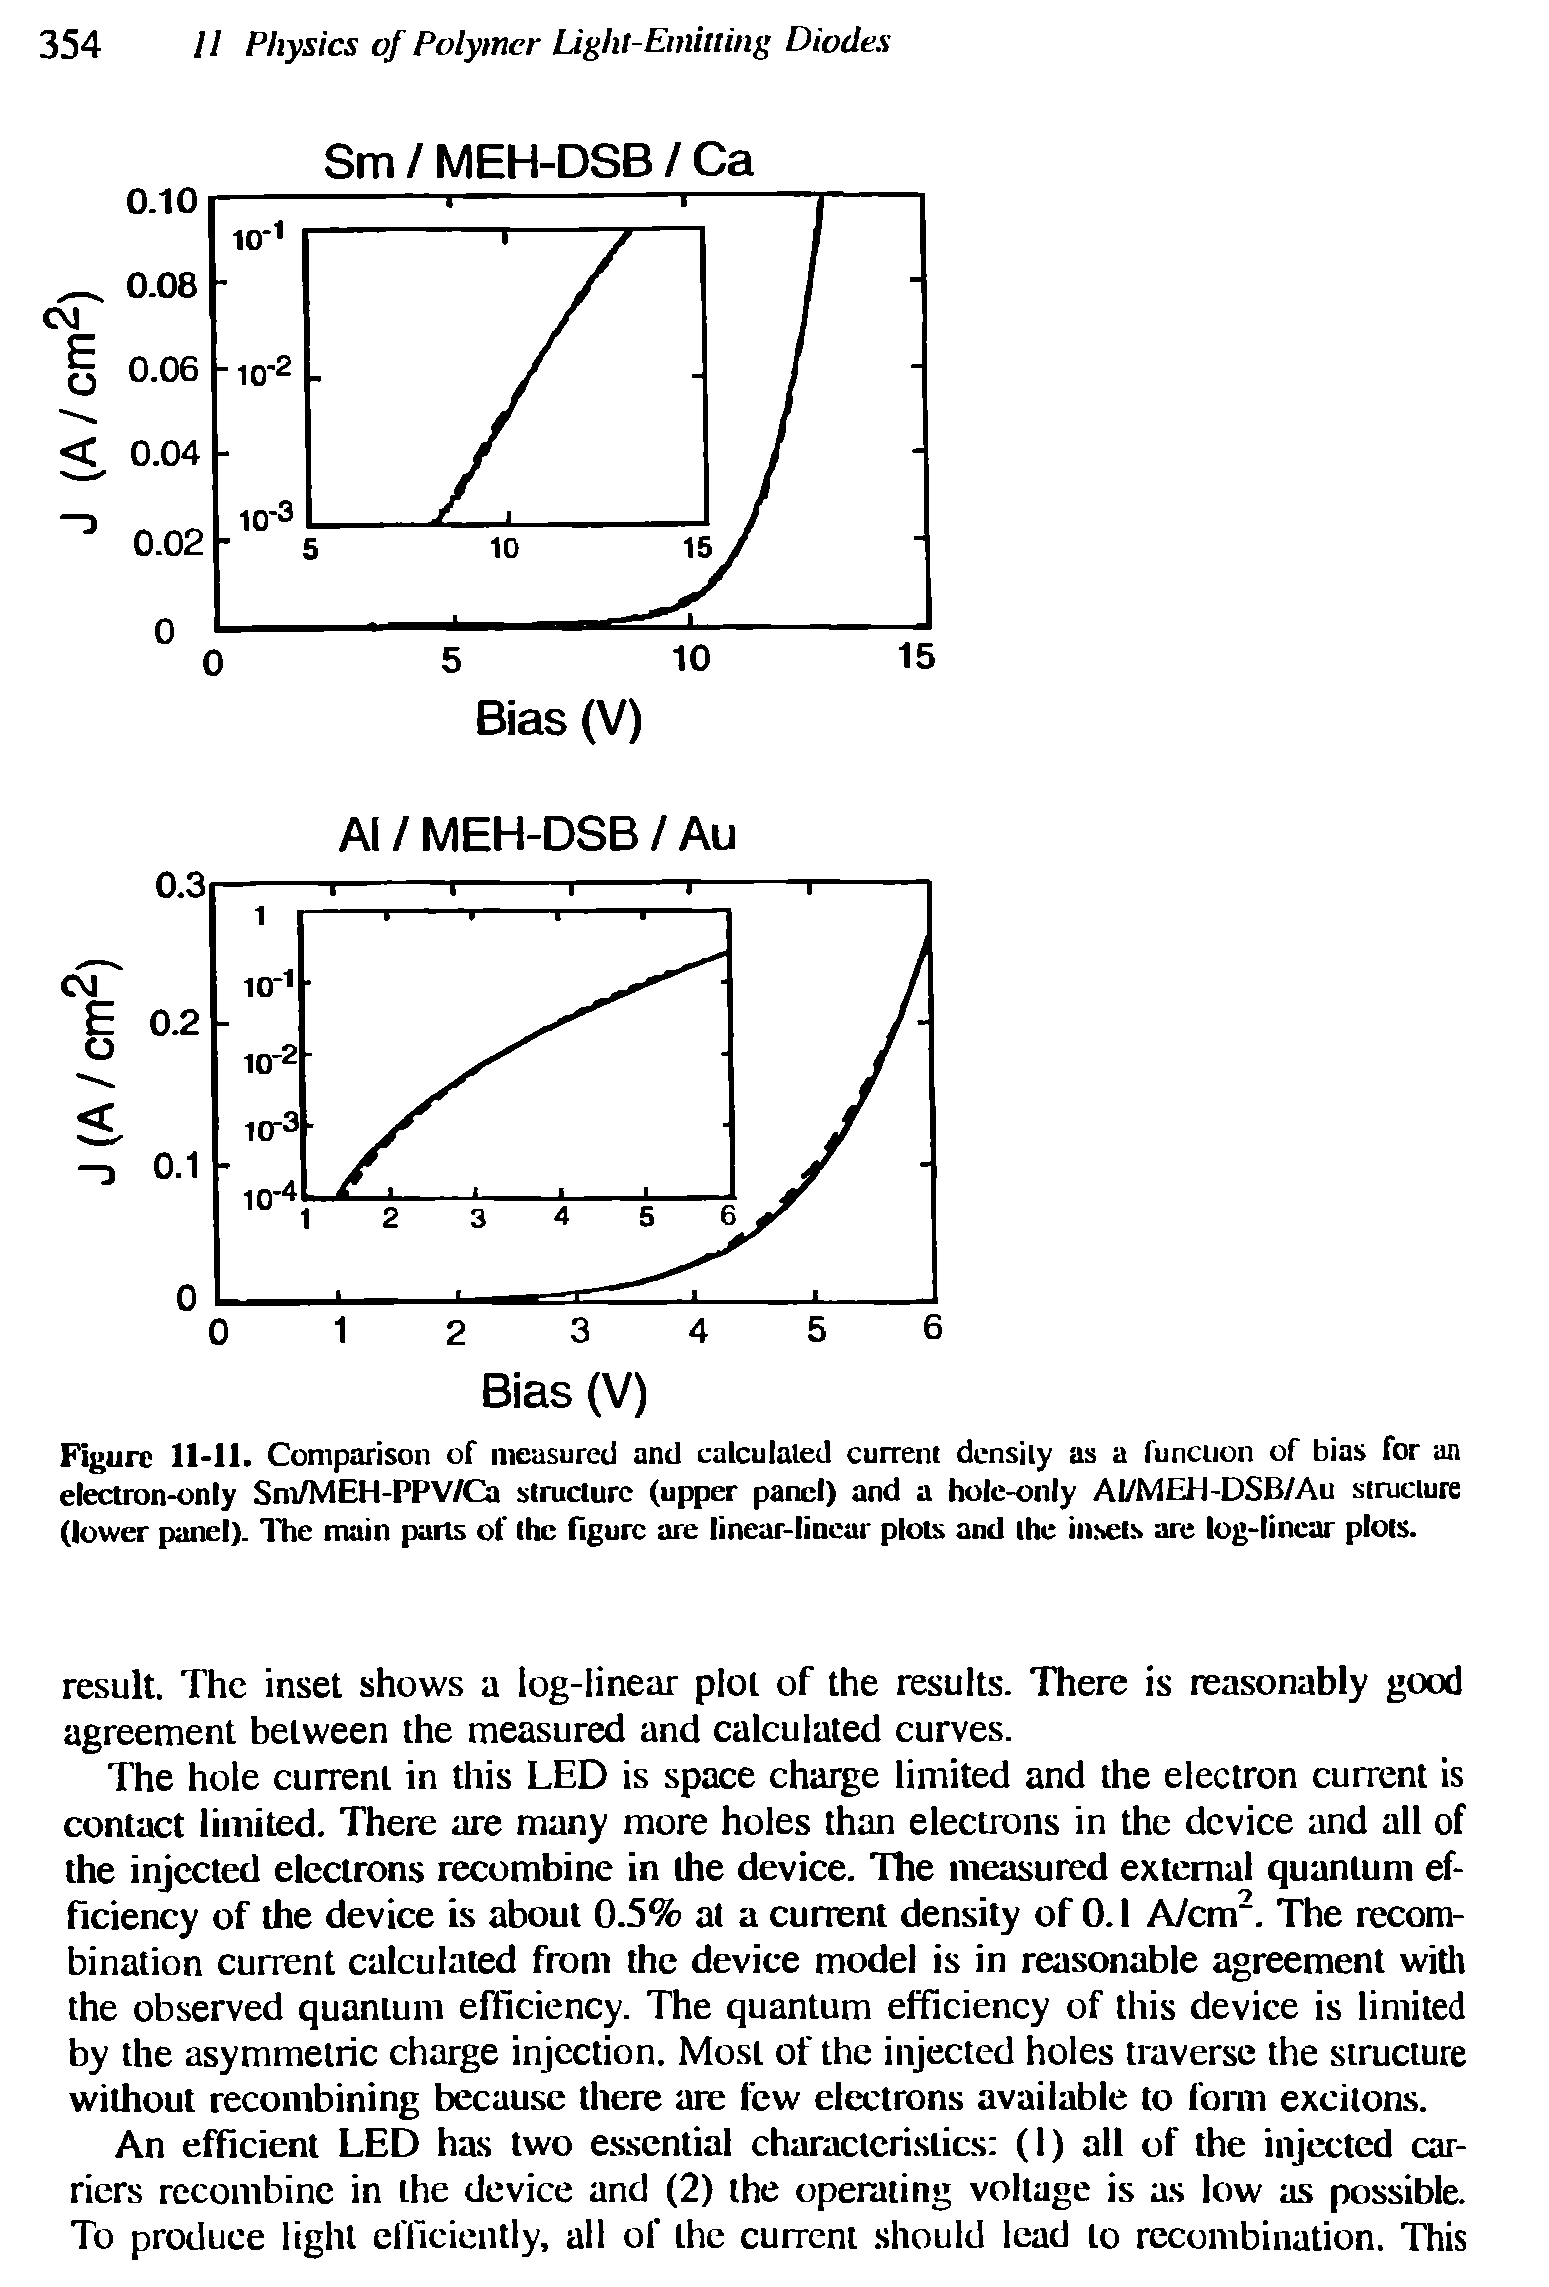 Figure 11-11. Comparison of measured and calculated current density as a function of bias for an electron-only Sm/MEH-PPV/Ca structure (upper panel) and a hole-only AI/MEH-DSB/Au structure (lower panel). The main parts of the figure are linear-linear plots and the insets are log-linear plots.